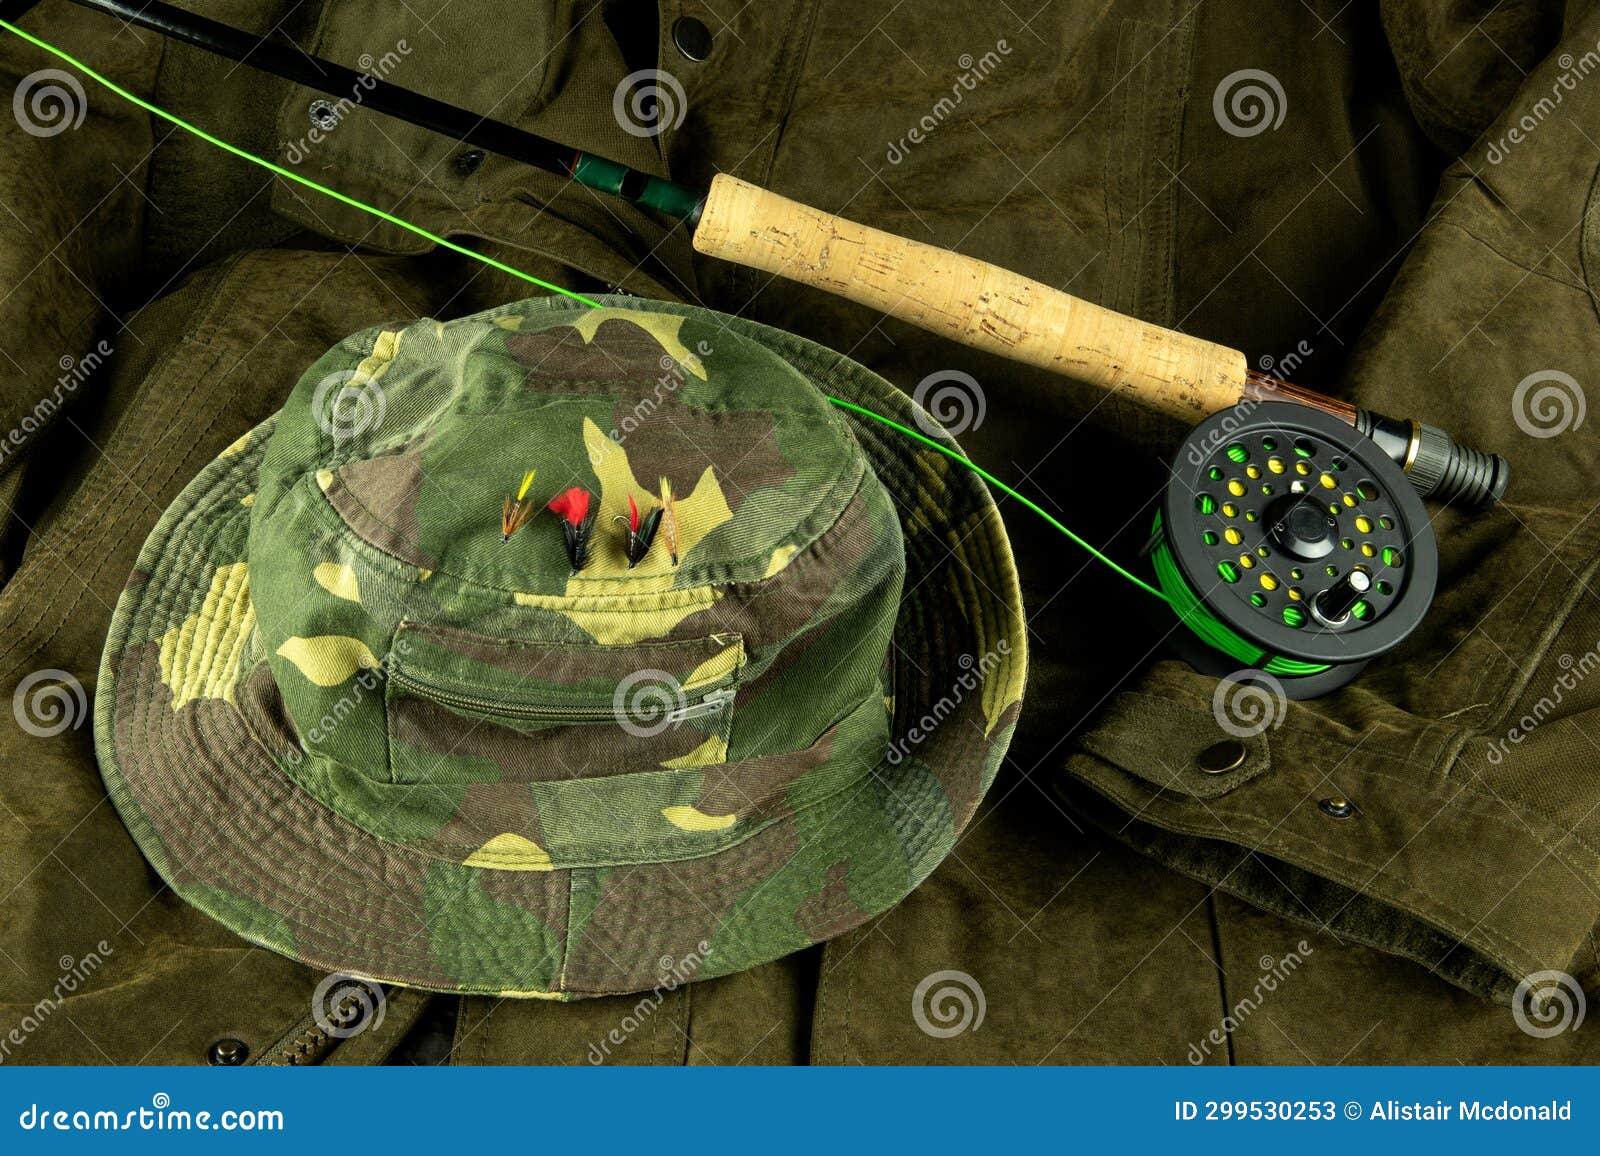 Fly Fishing Rod and Reel with Line on an Outdoor Coat with Fishing Hat and  Trout Flies Stock Image - Image of handle, angling: 299530253